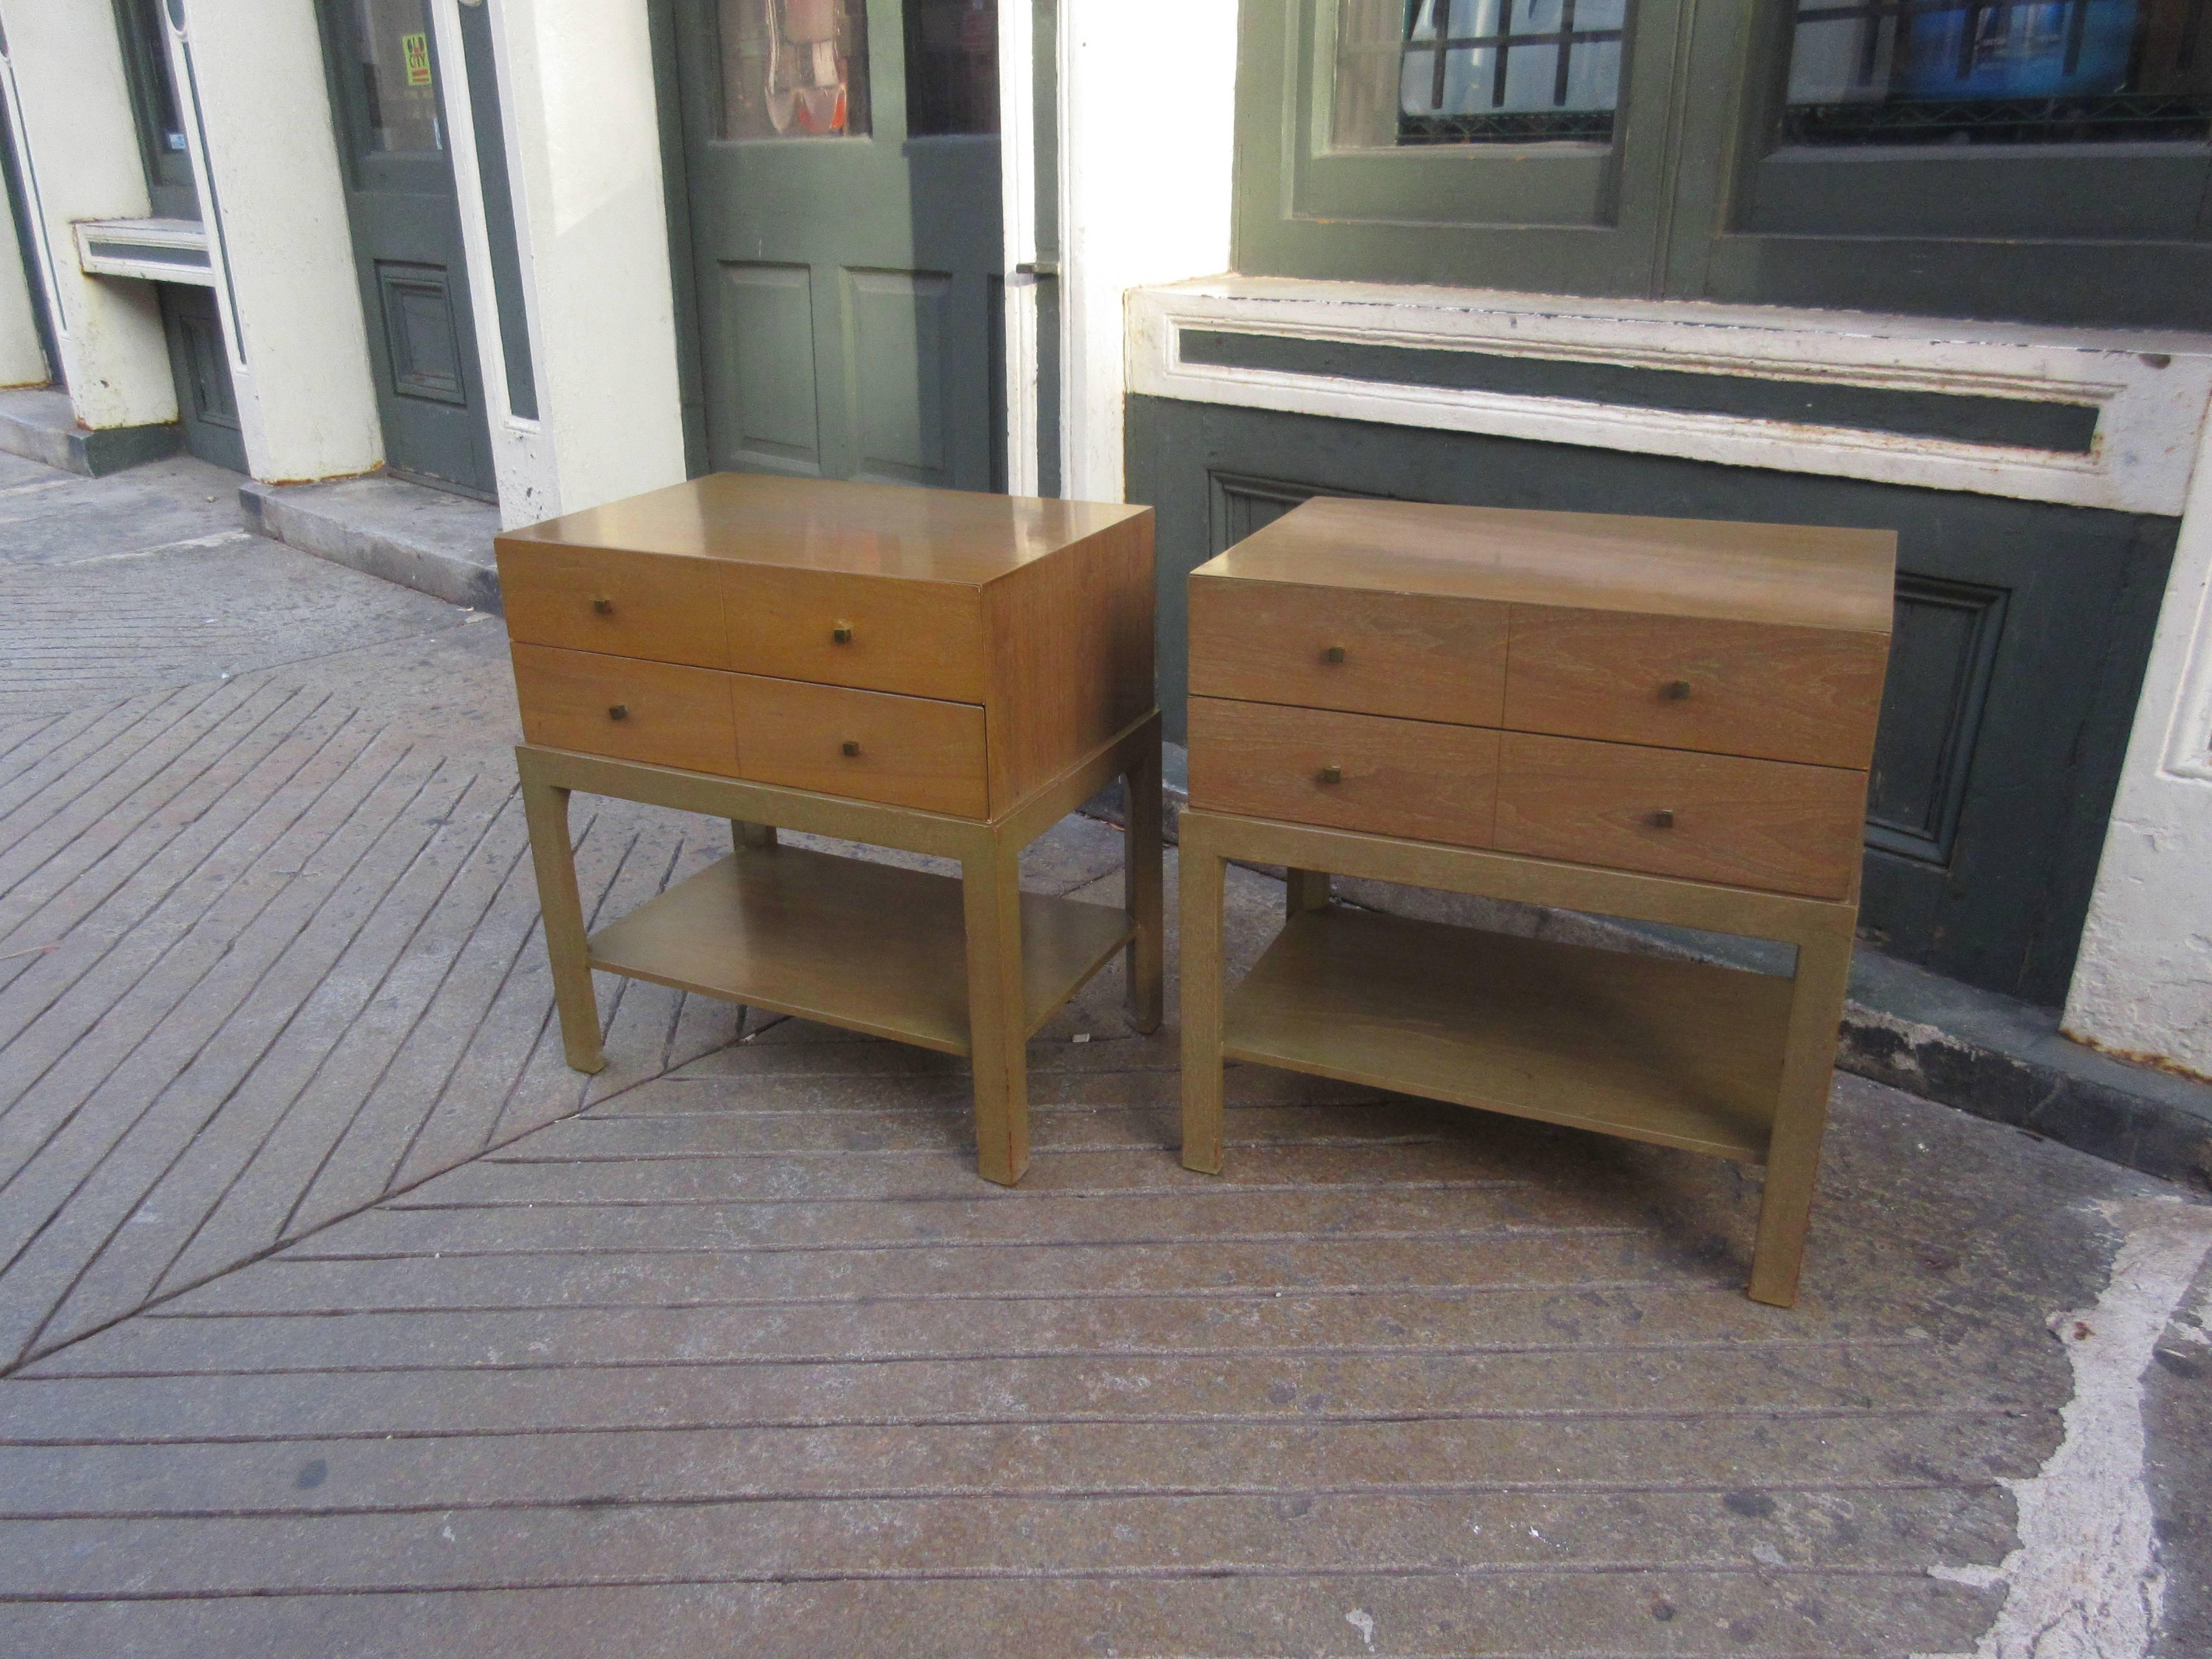 Matching nightstands that have the appearance of boxes sitting on raised stands with bottom shelf. Two drawers, with four small brass knobs. Retains original finish in better than average condition. Decal labels in bottom of drawers.